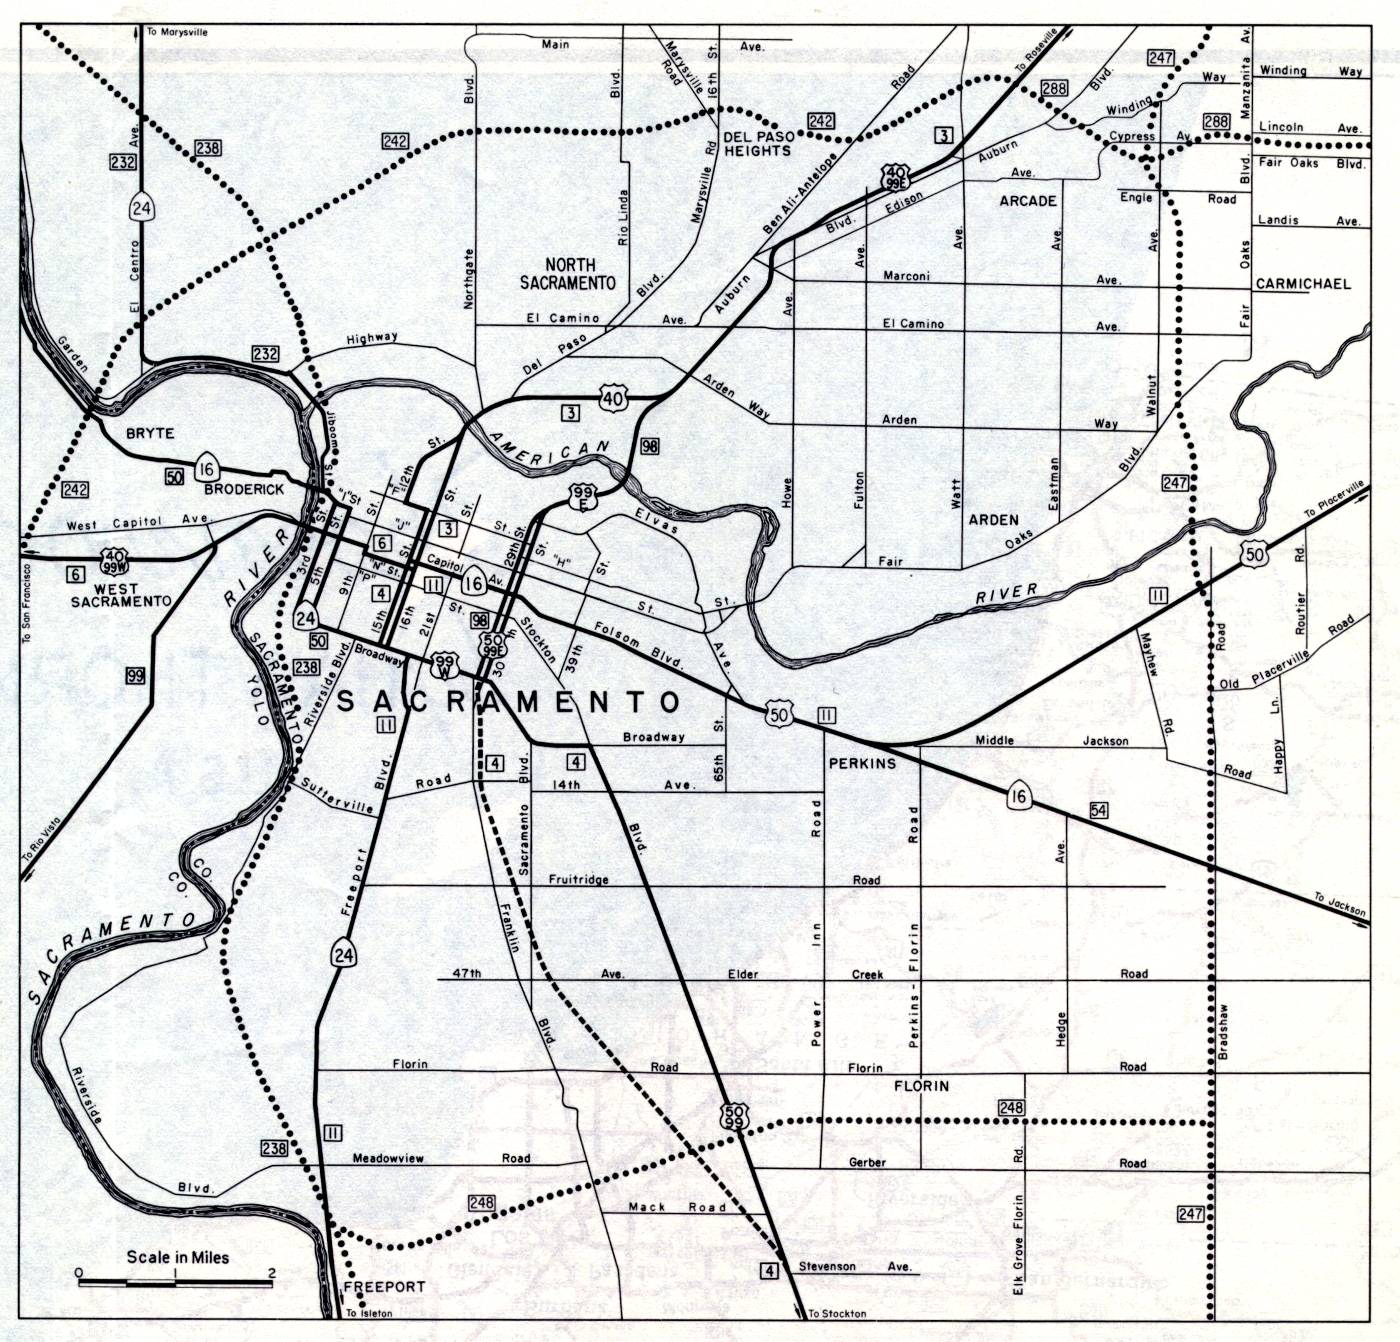 Detail map for Sacramento on the 1961 California official highway map